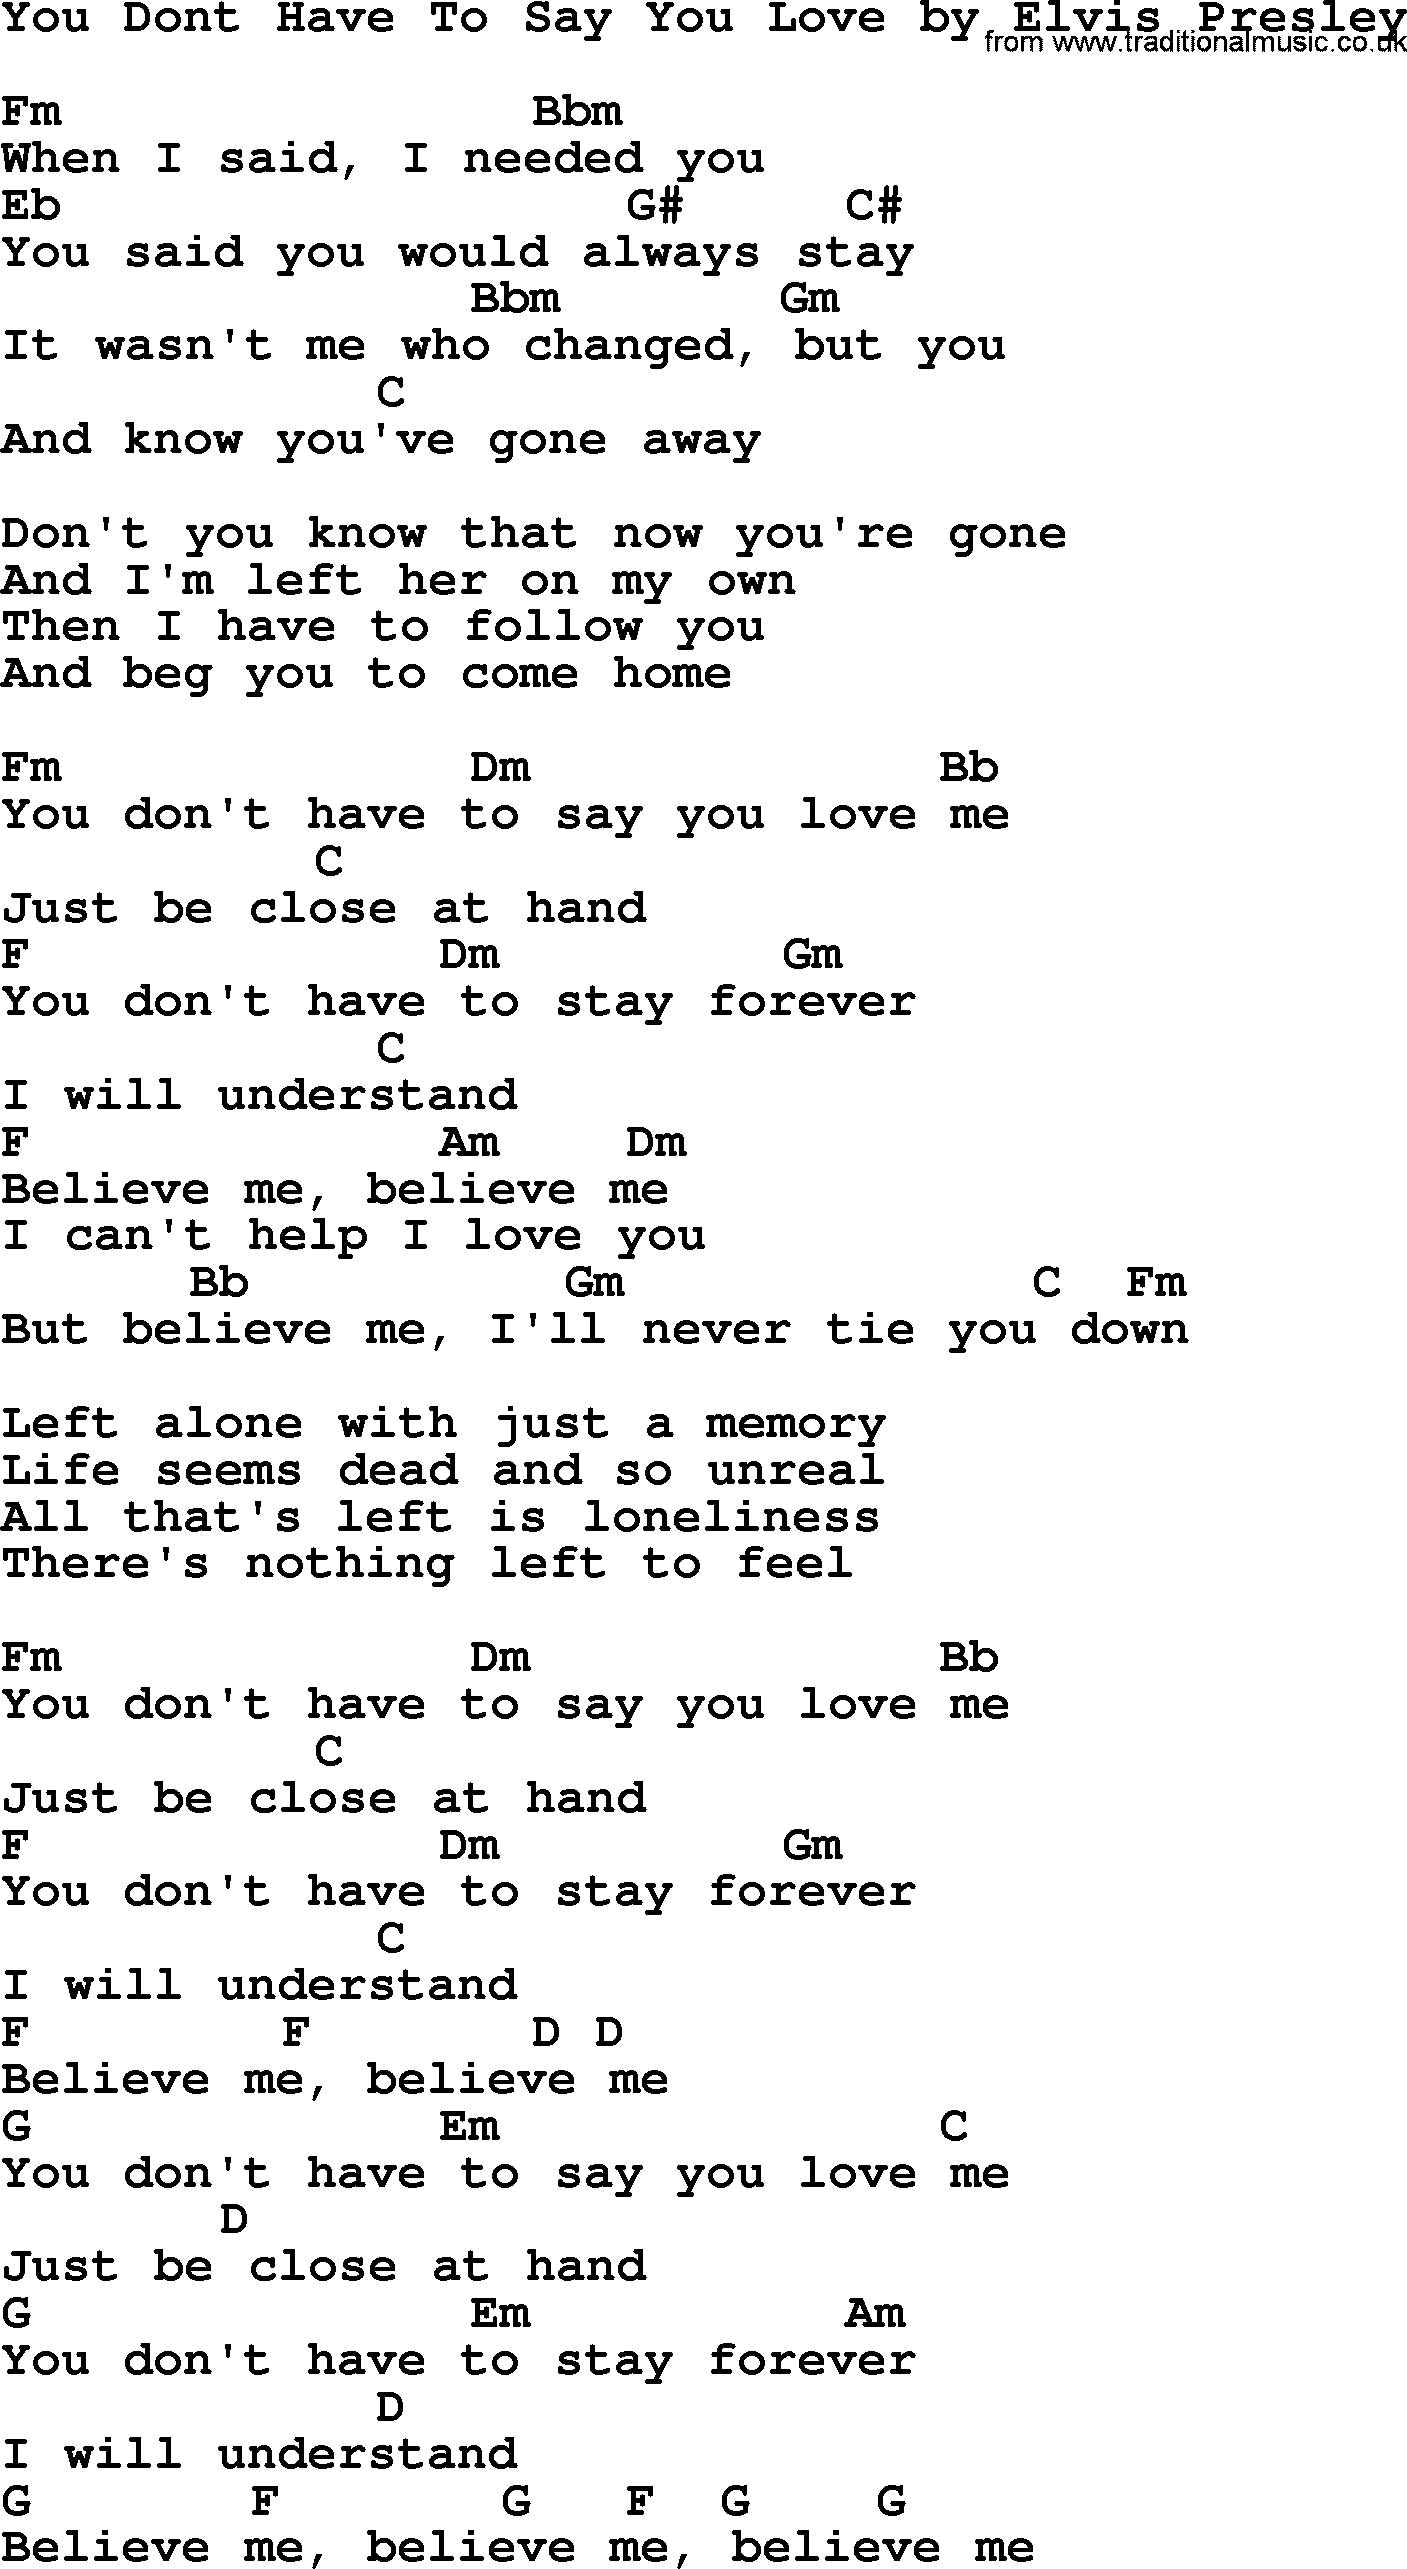 Elvis Presley song: You Dont Have To Say You Love, lyrics and chords